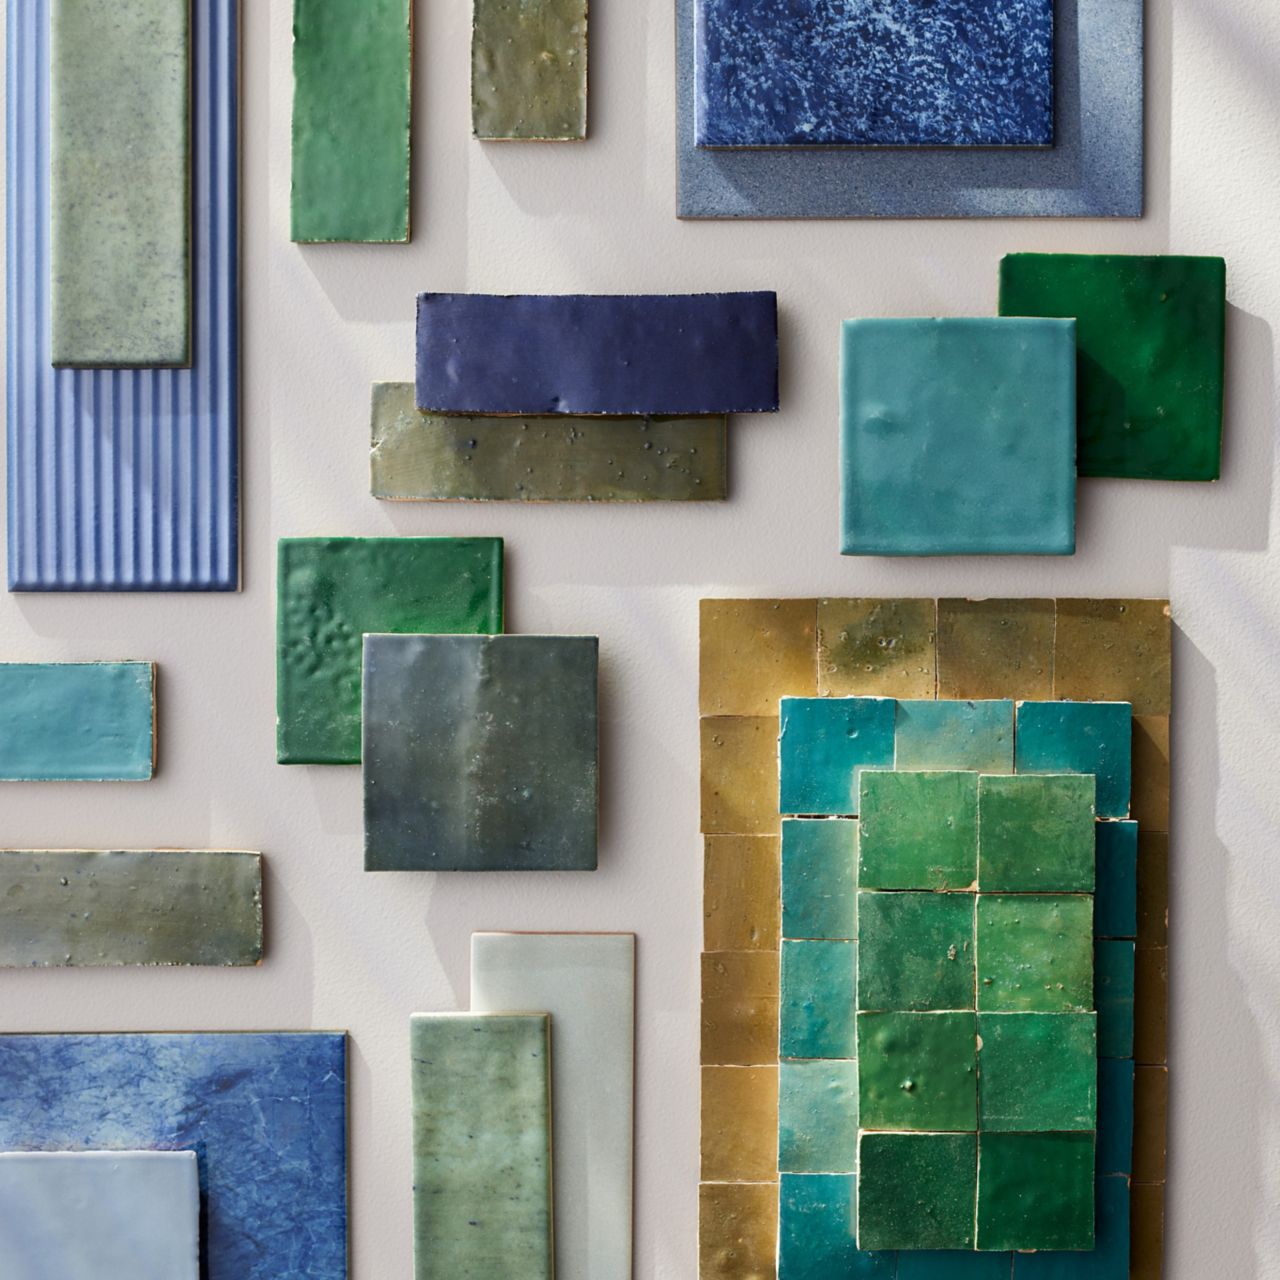 Blue tiles are a popular choice for projects in any room of the home. Our selection of tiles features a beautiful range of blue and green shades in a variety of shapes and materials.